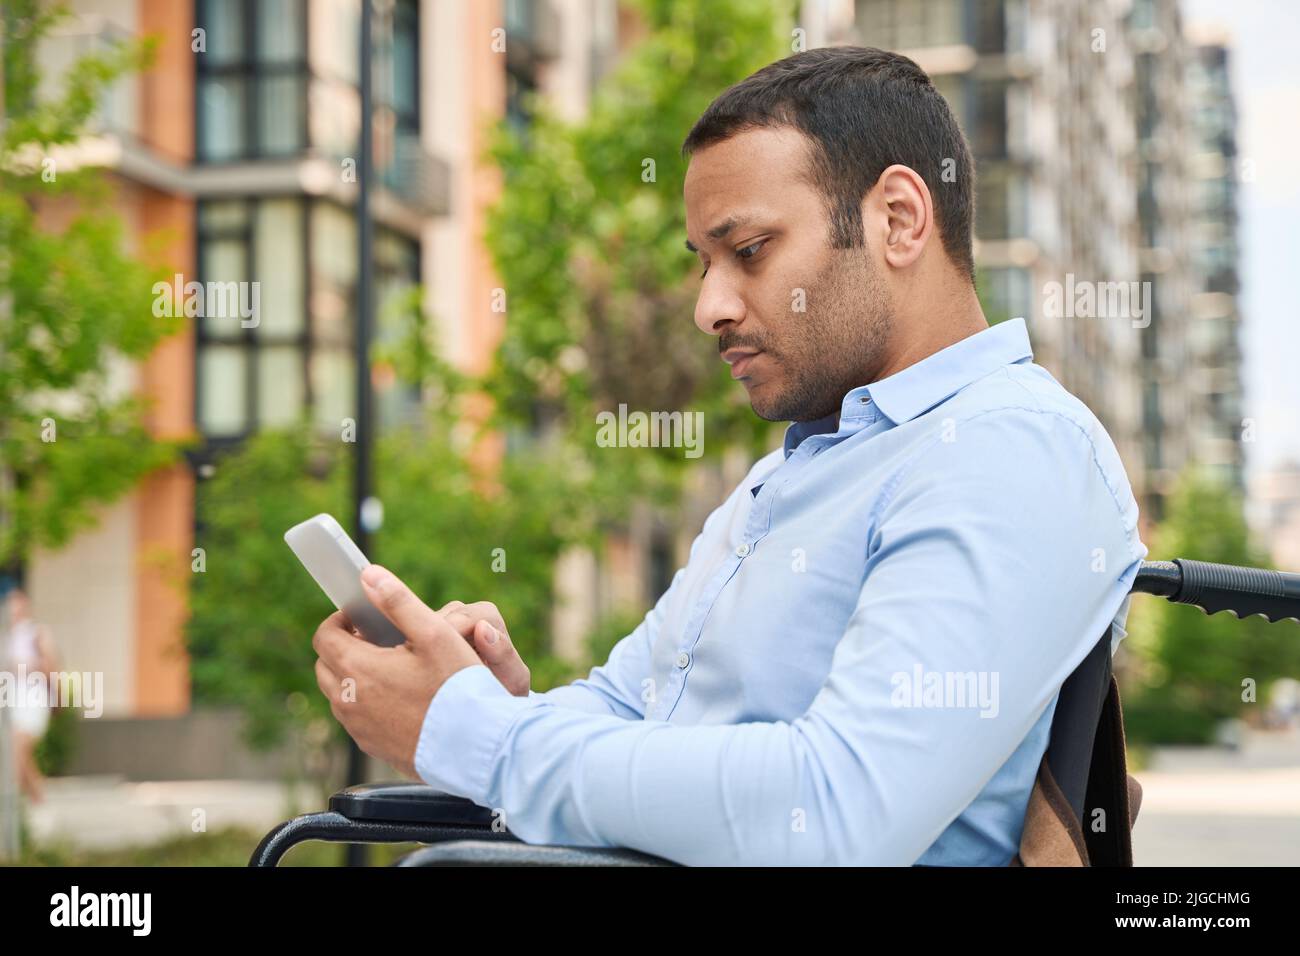 Man with disability surfing net from smartphone Stock Photo